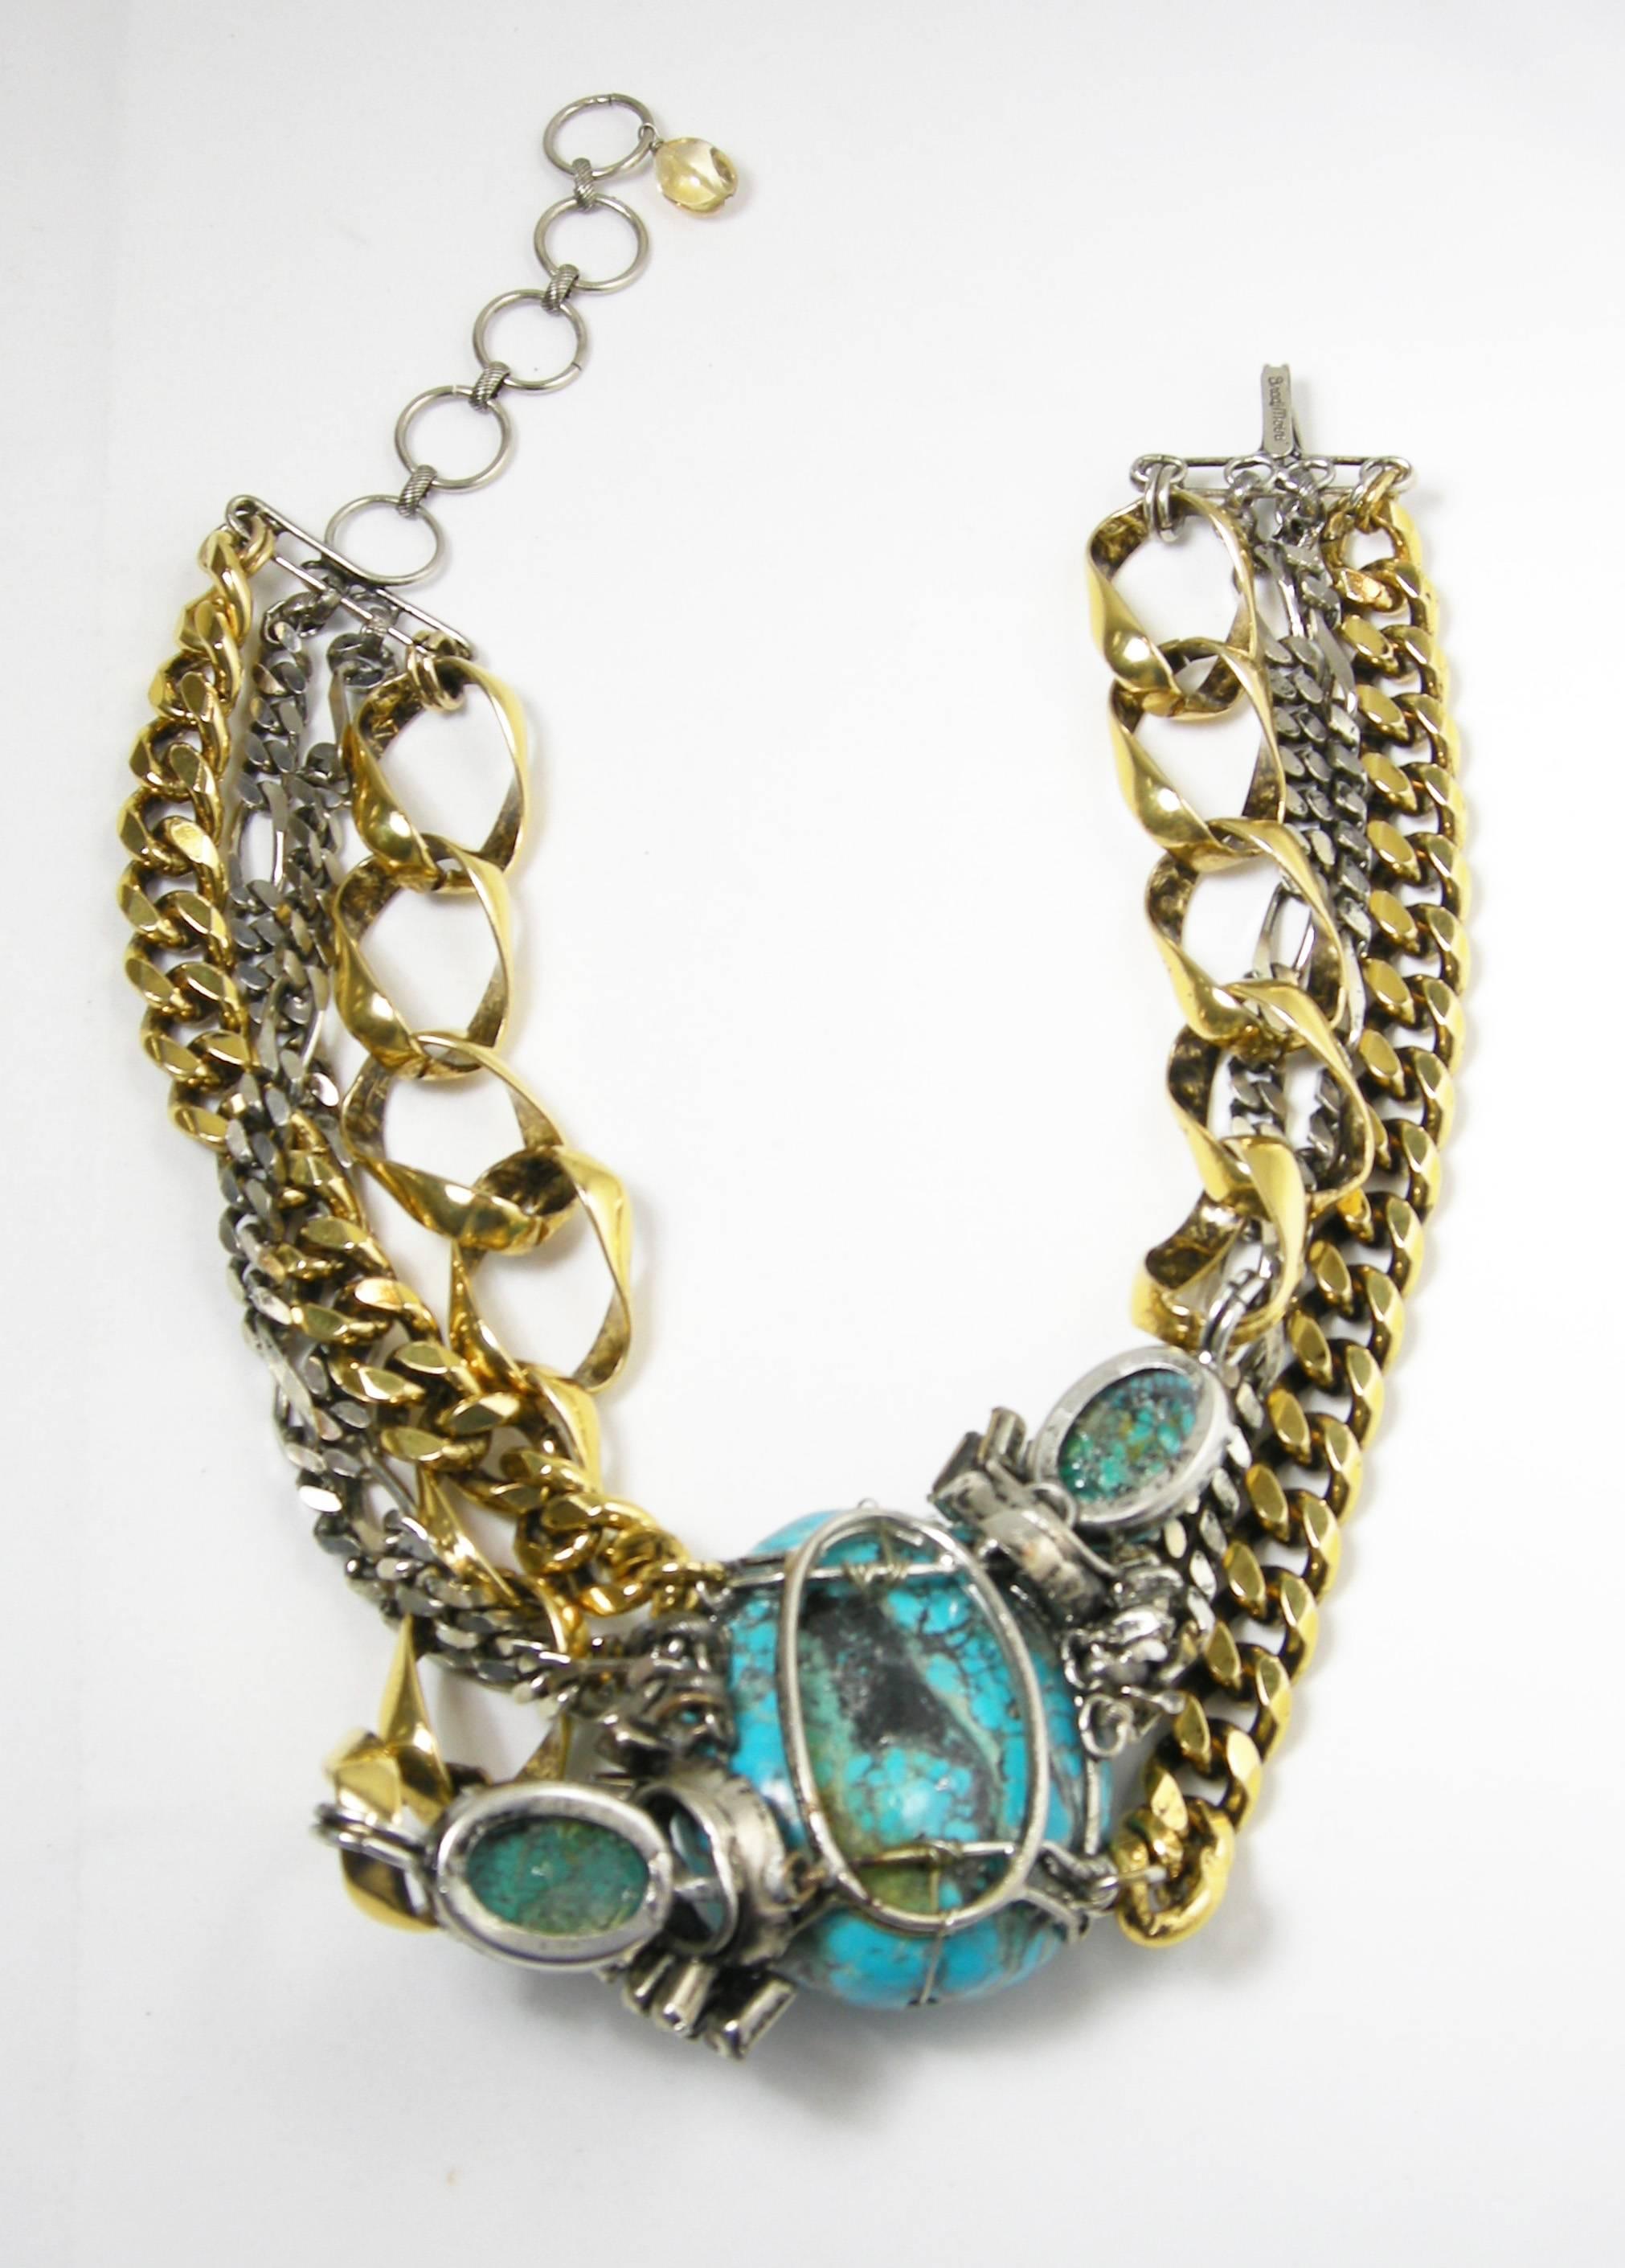 Vintage 1980s Iradj Moini Multi-Strand Turquoise and Crystal Link Necklace 1